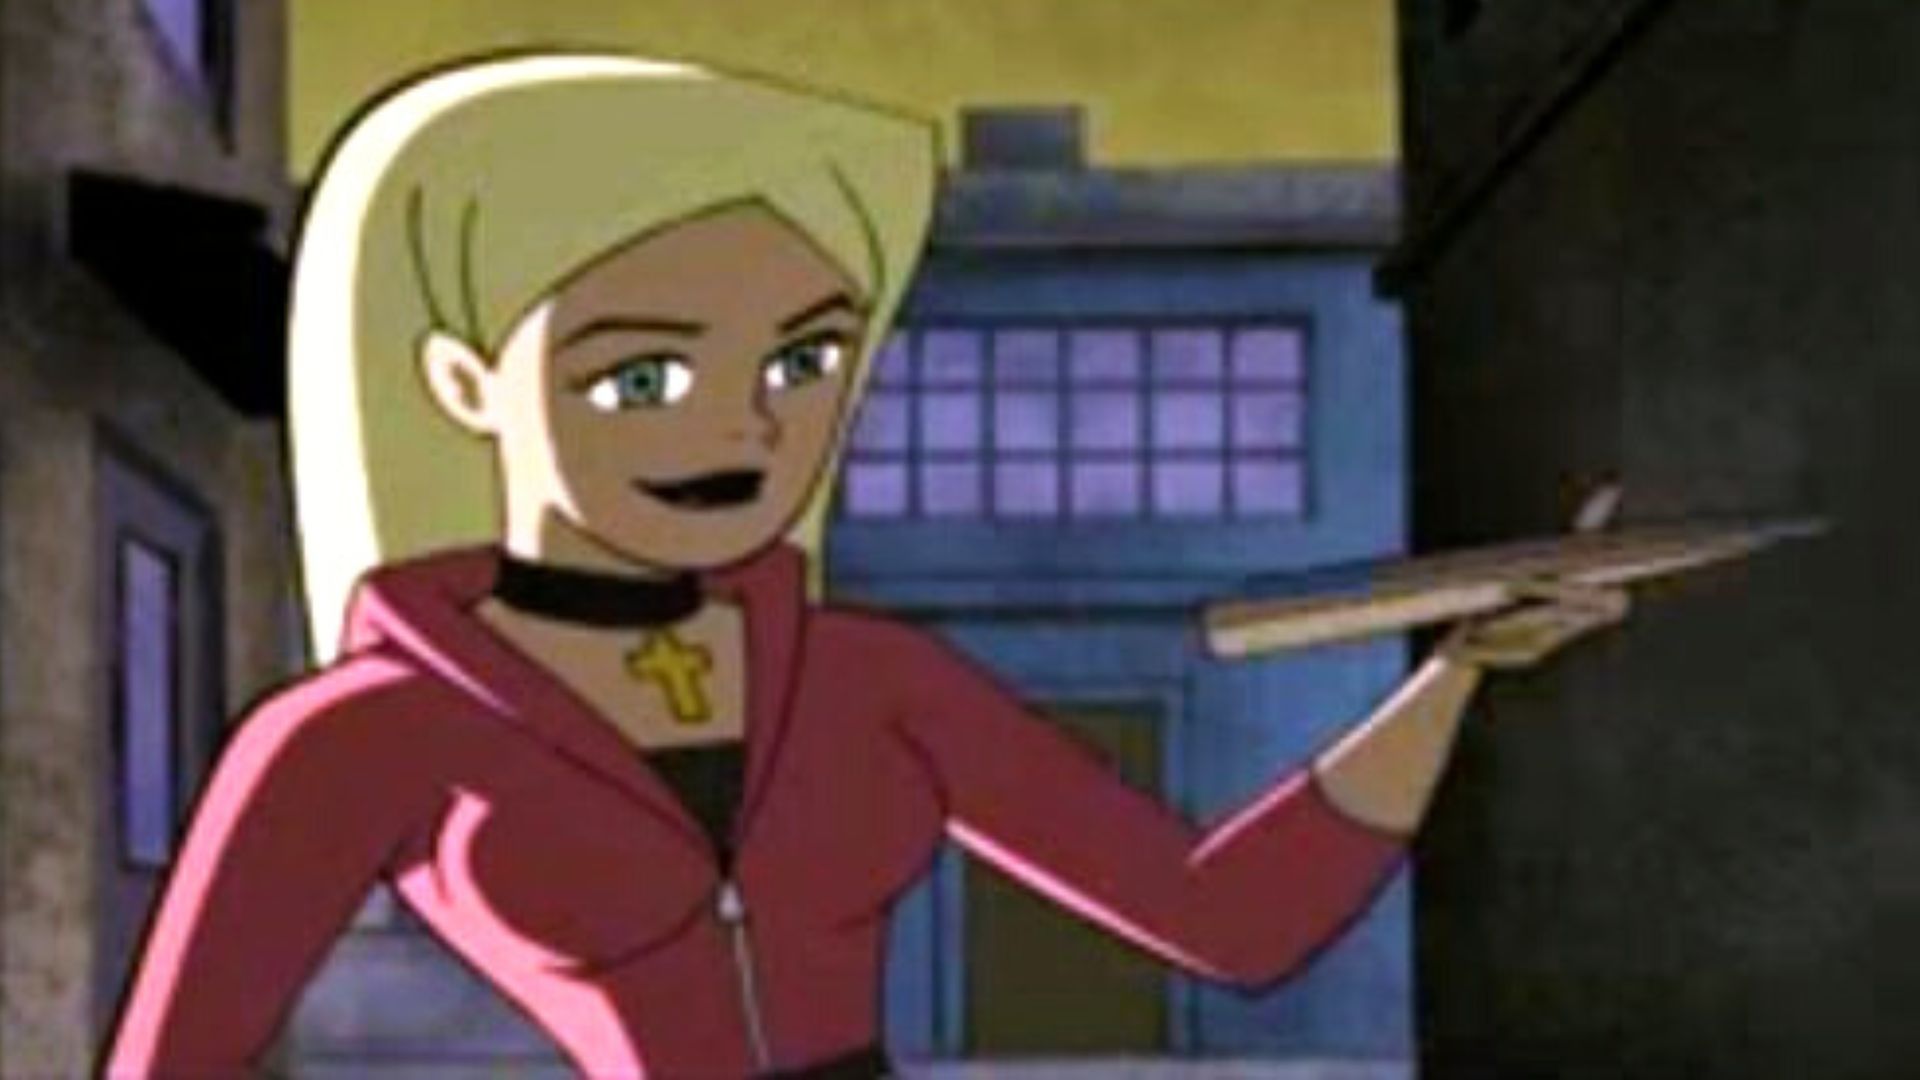 The Leaked Buffy Animated Series That Didn’t Include Sarah Michelle Gellar - Buffy the Vampire Slayer: The Animated Series